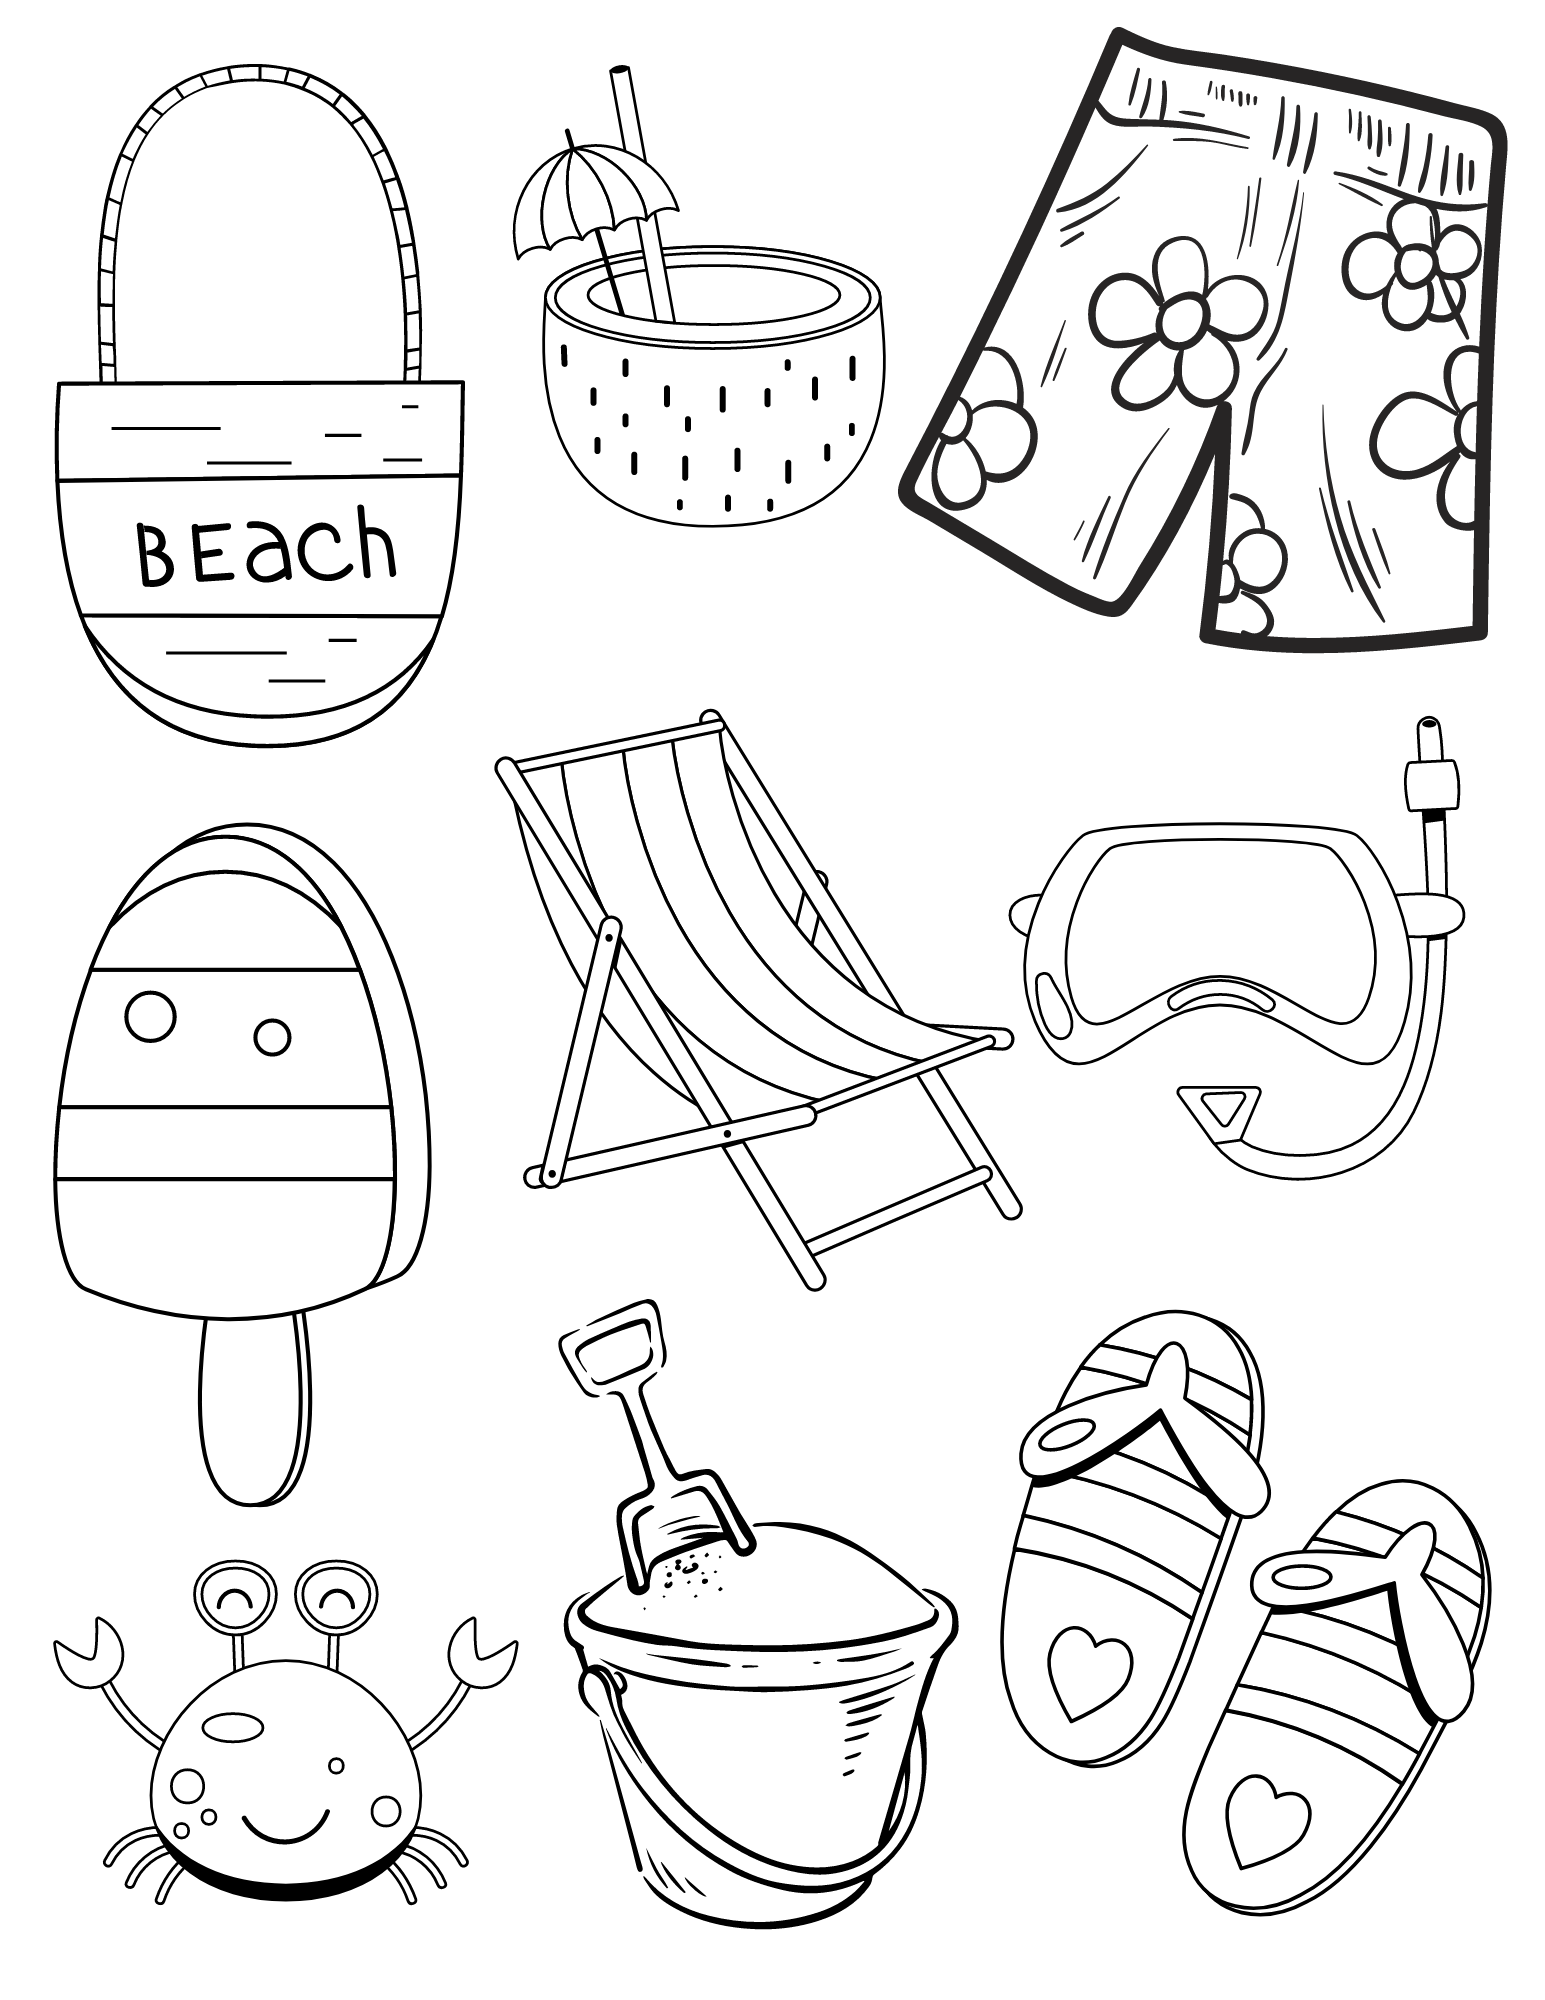 Free printable beach coloring pages for kids and adults